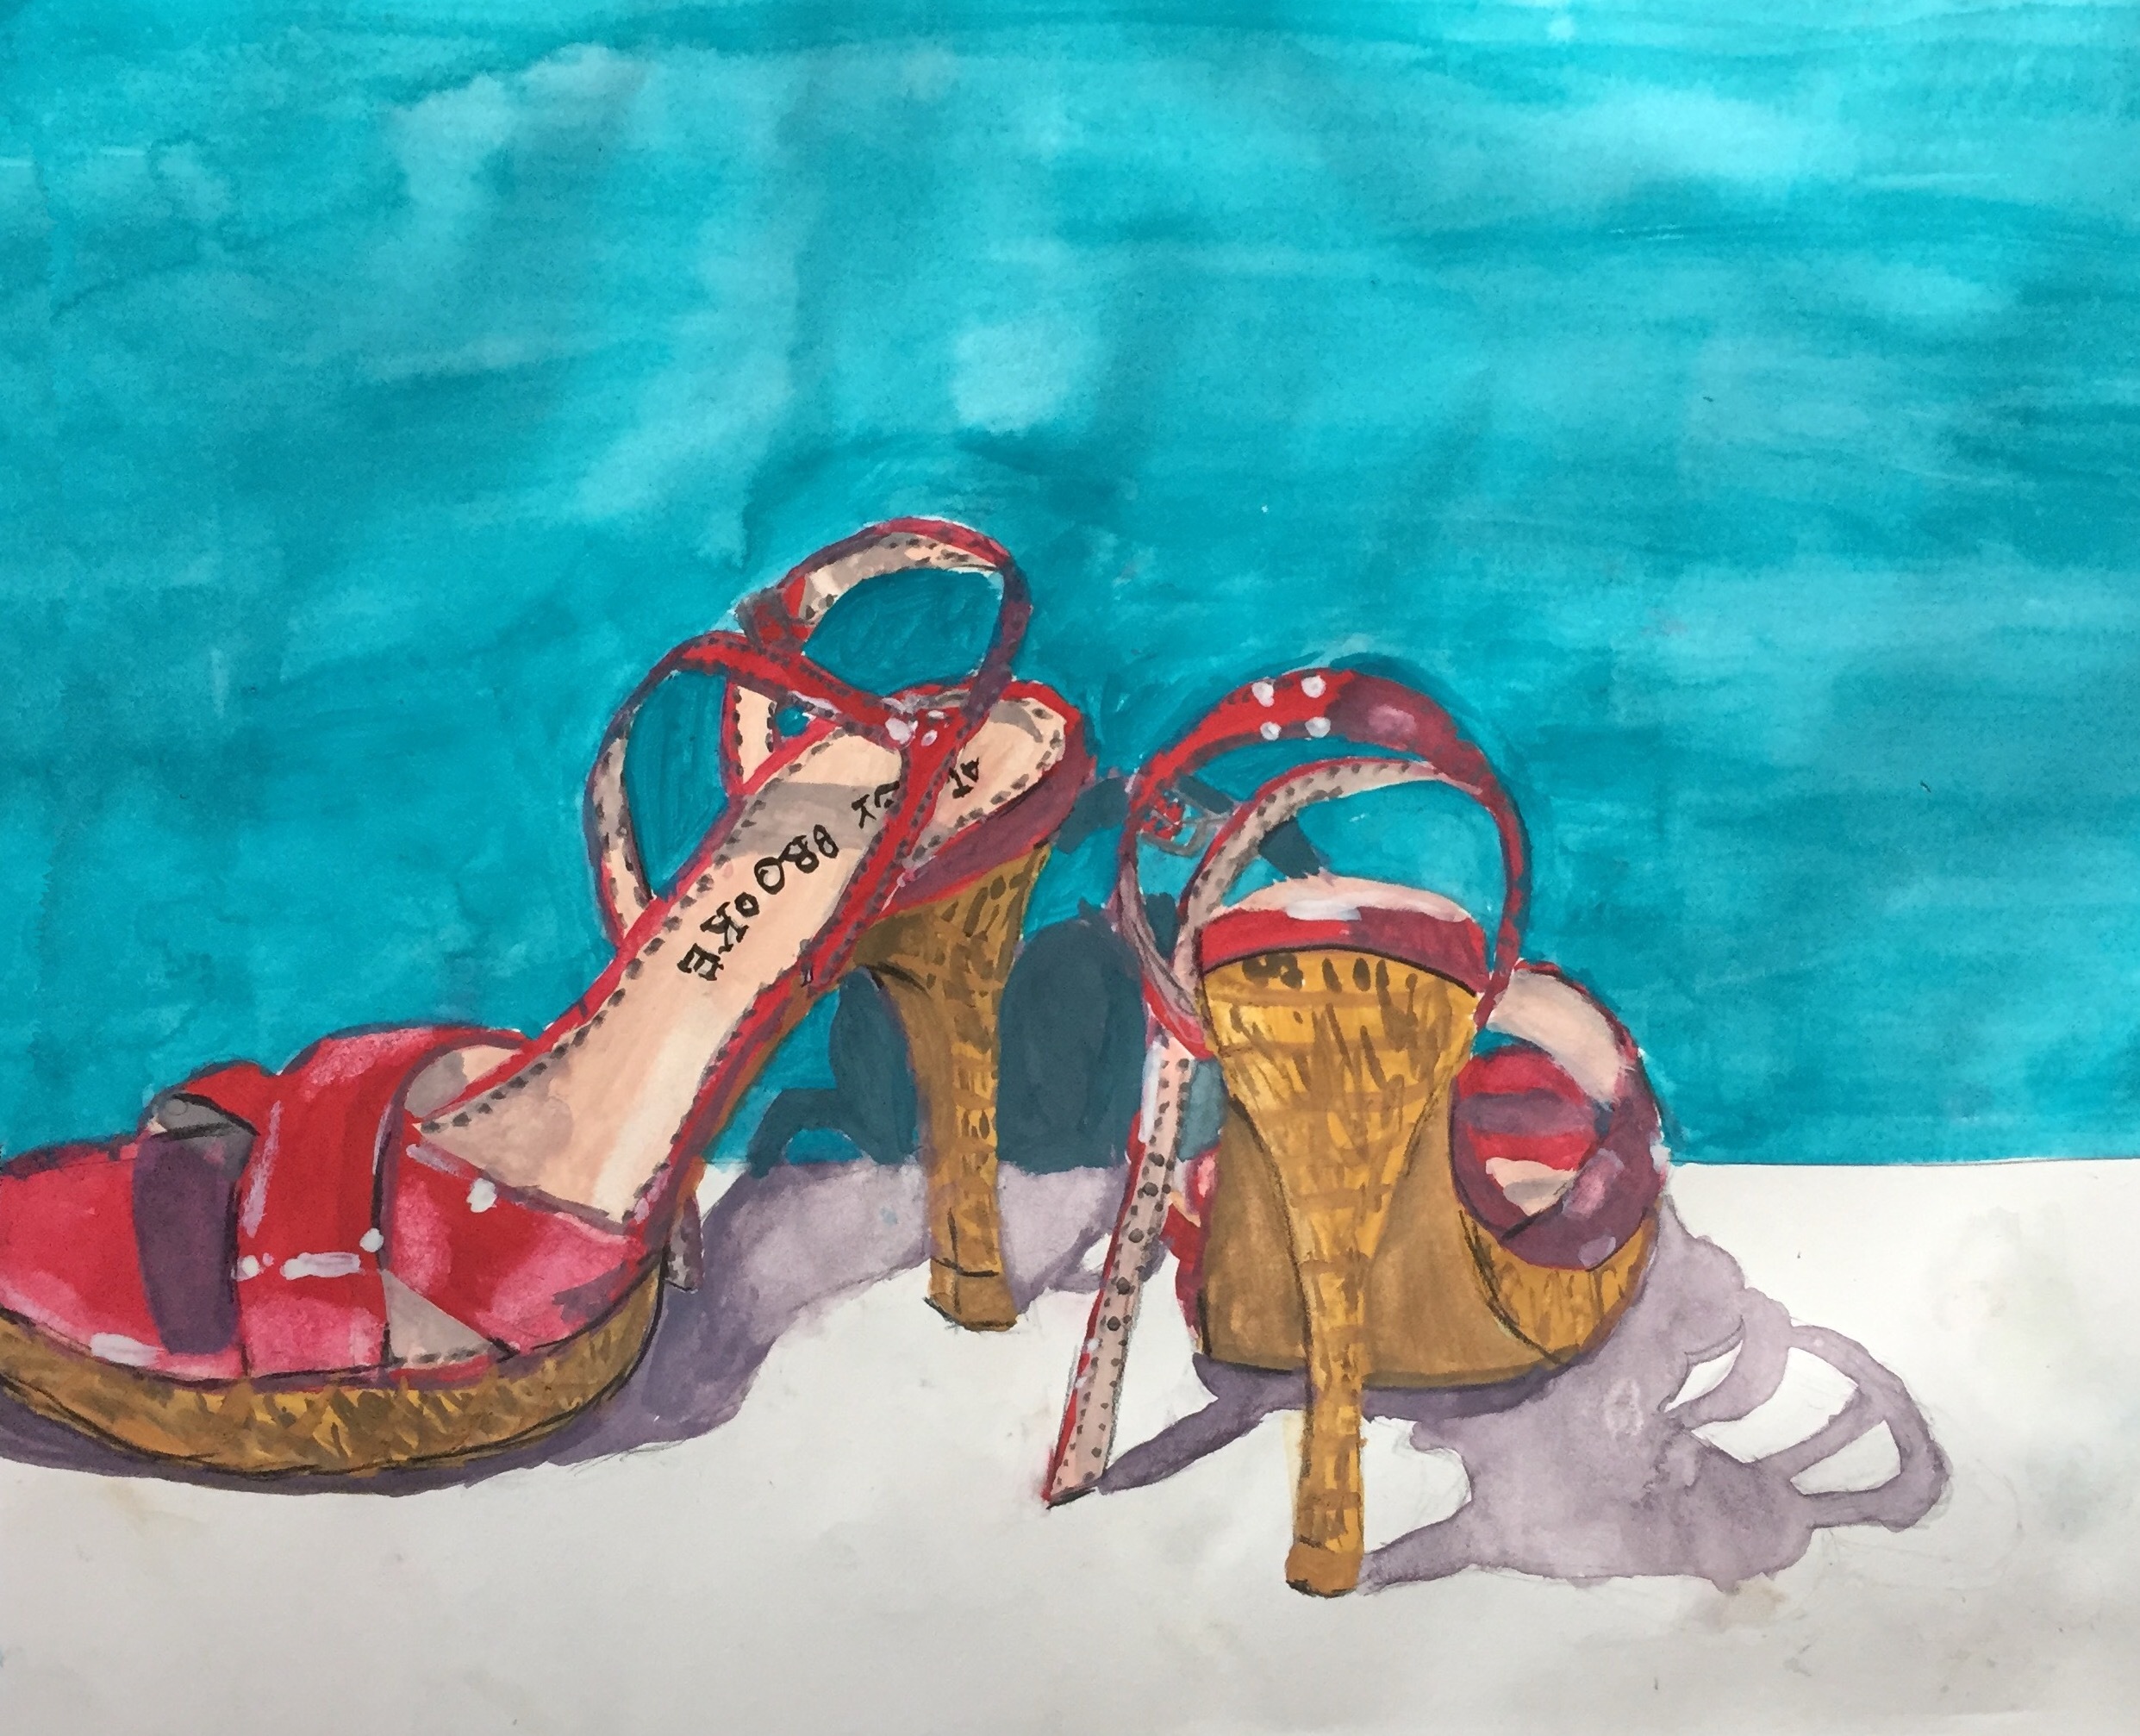 View Image Details Janelle - Red Shoes in watercolor